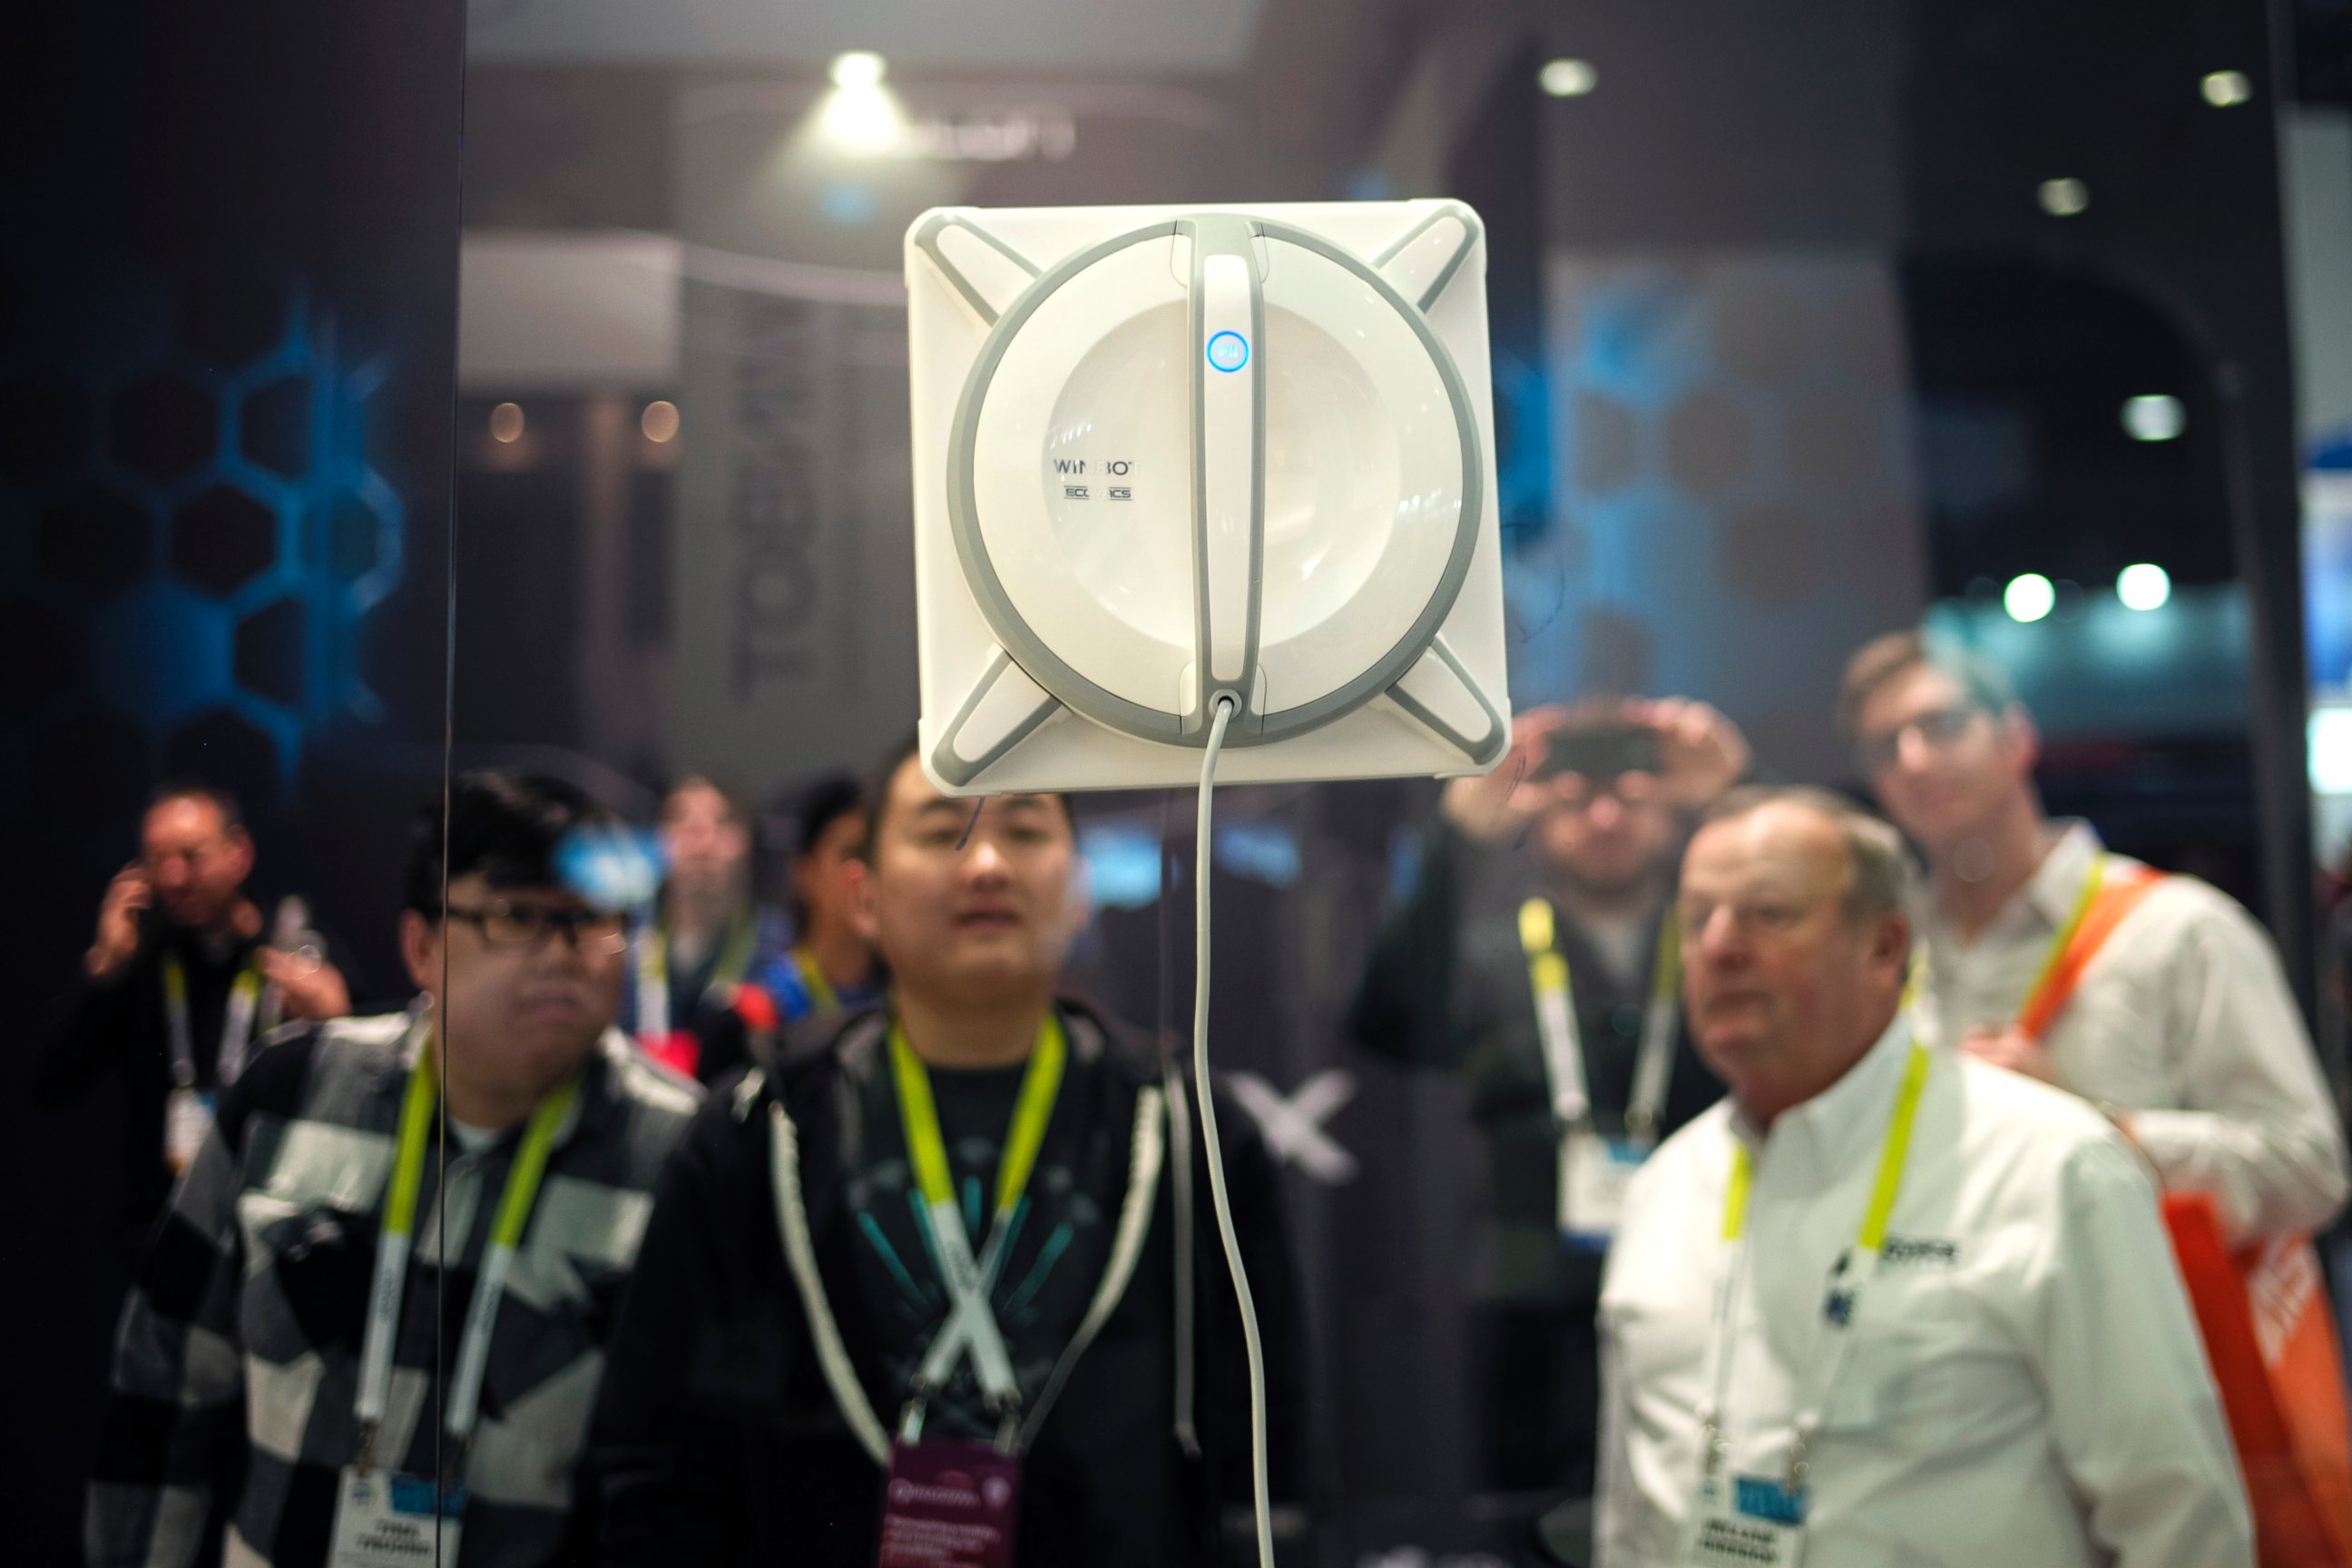 PHOTO: Attendees watch a Winbot, a window cleaning robot, clean the window at the Ecovacs Robotics booth at the International CES, on Jan. 6, 2015, in Las Vegas.